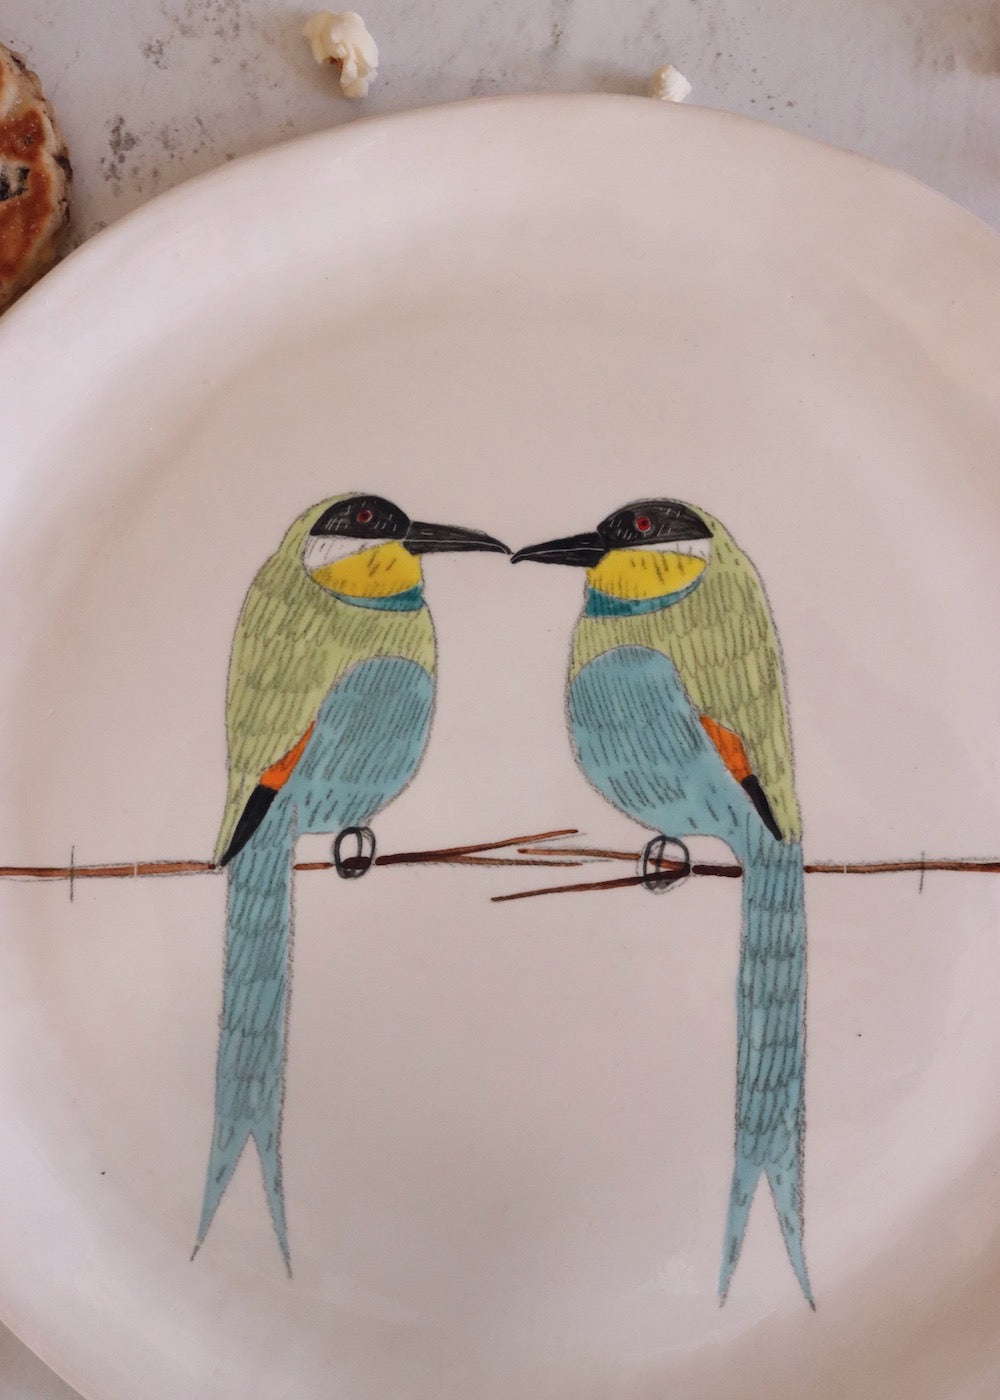 NEW: Large Round Serving Platter - 2 Birds Blue Breast & Tail